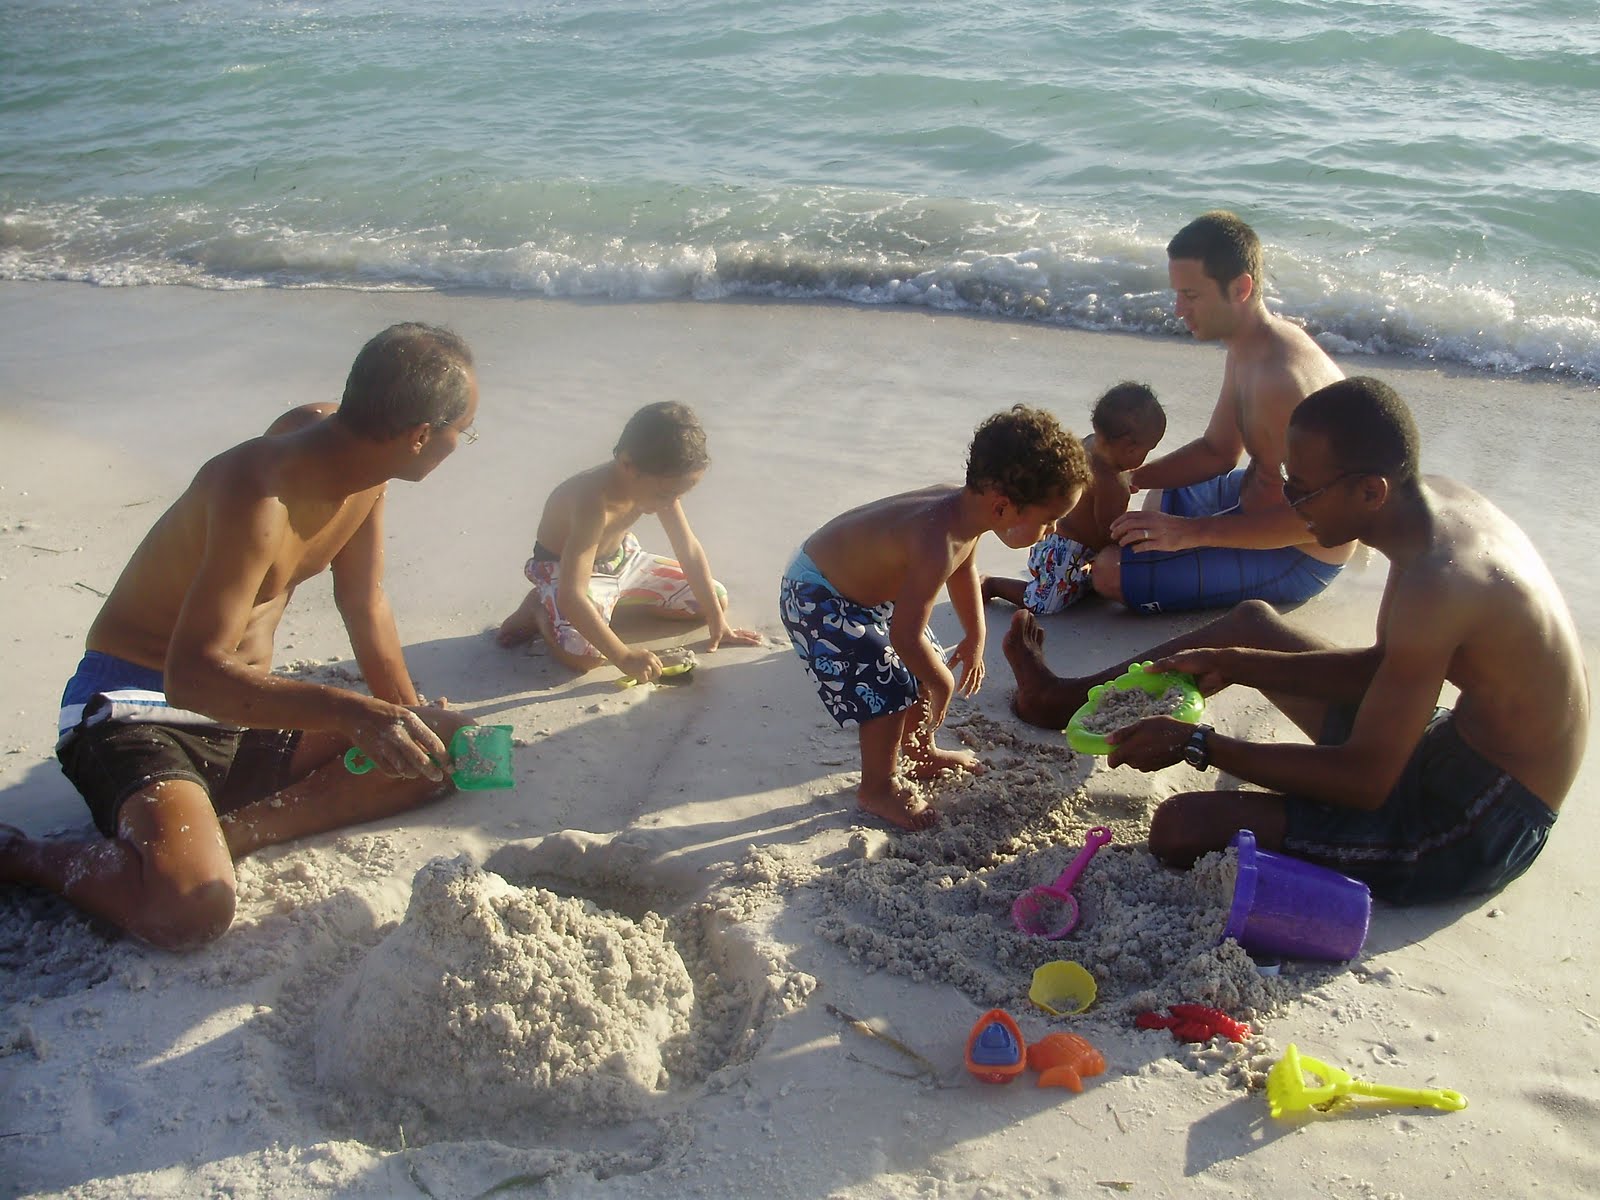 Here in America: Florida Family Vacation at the Beach